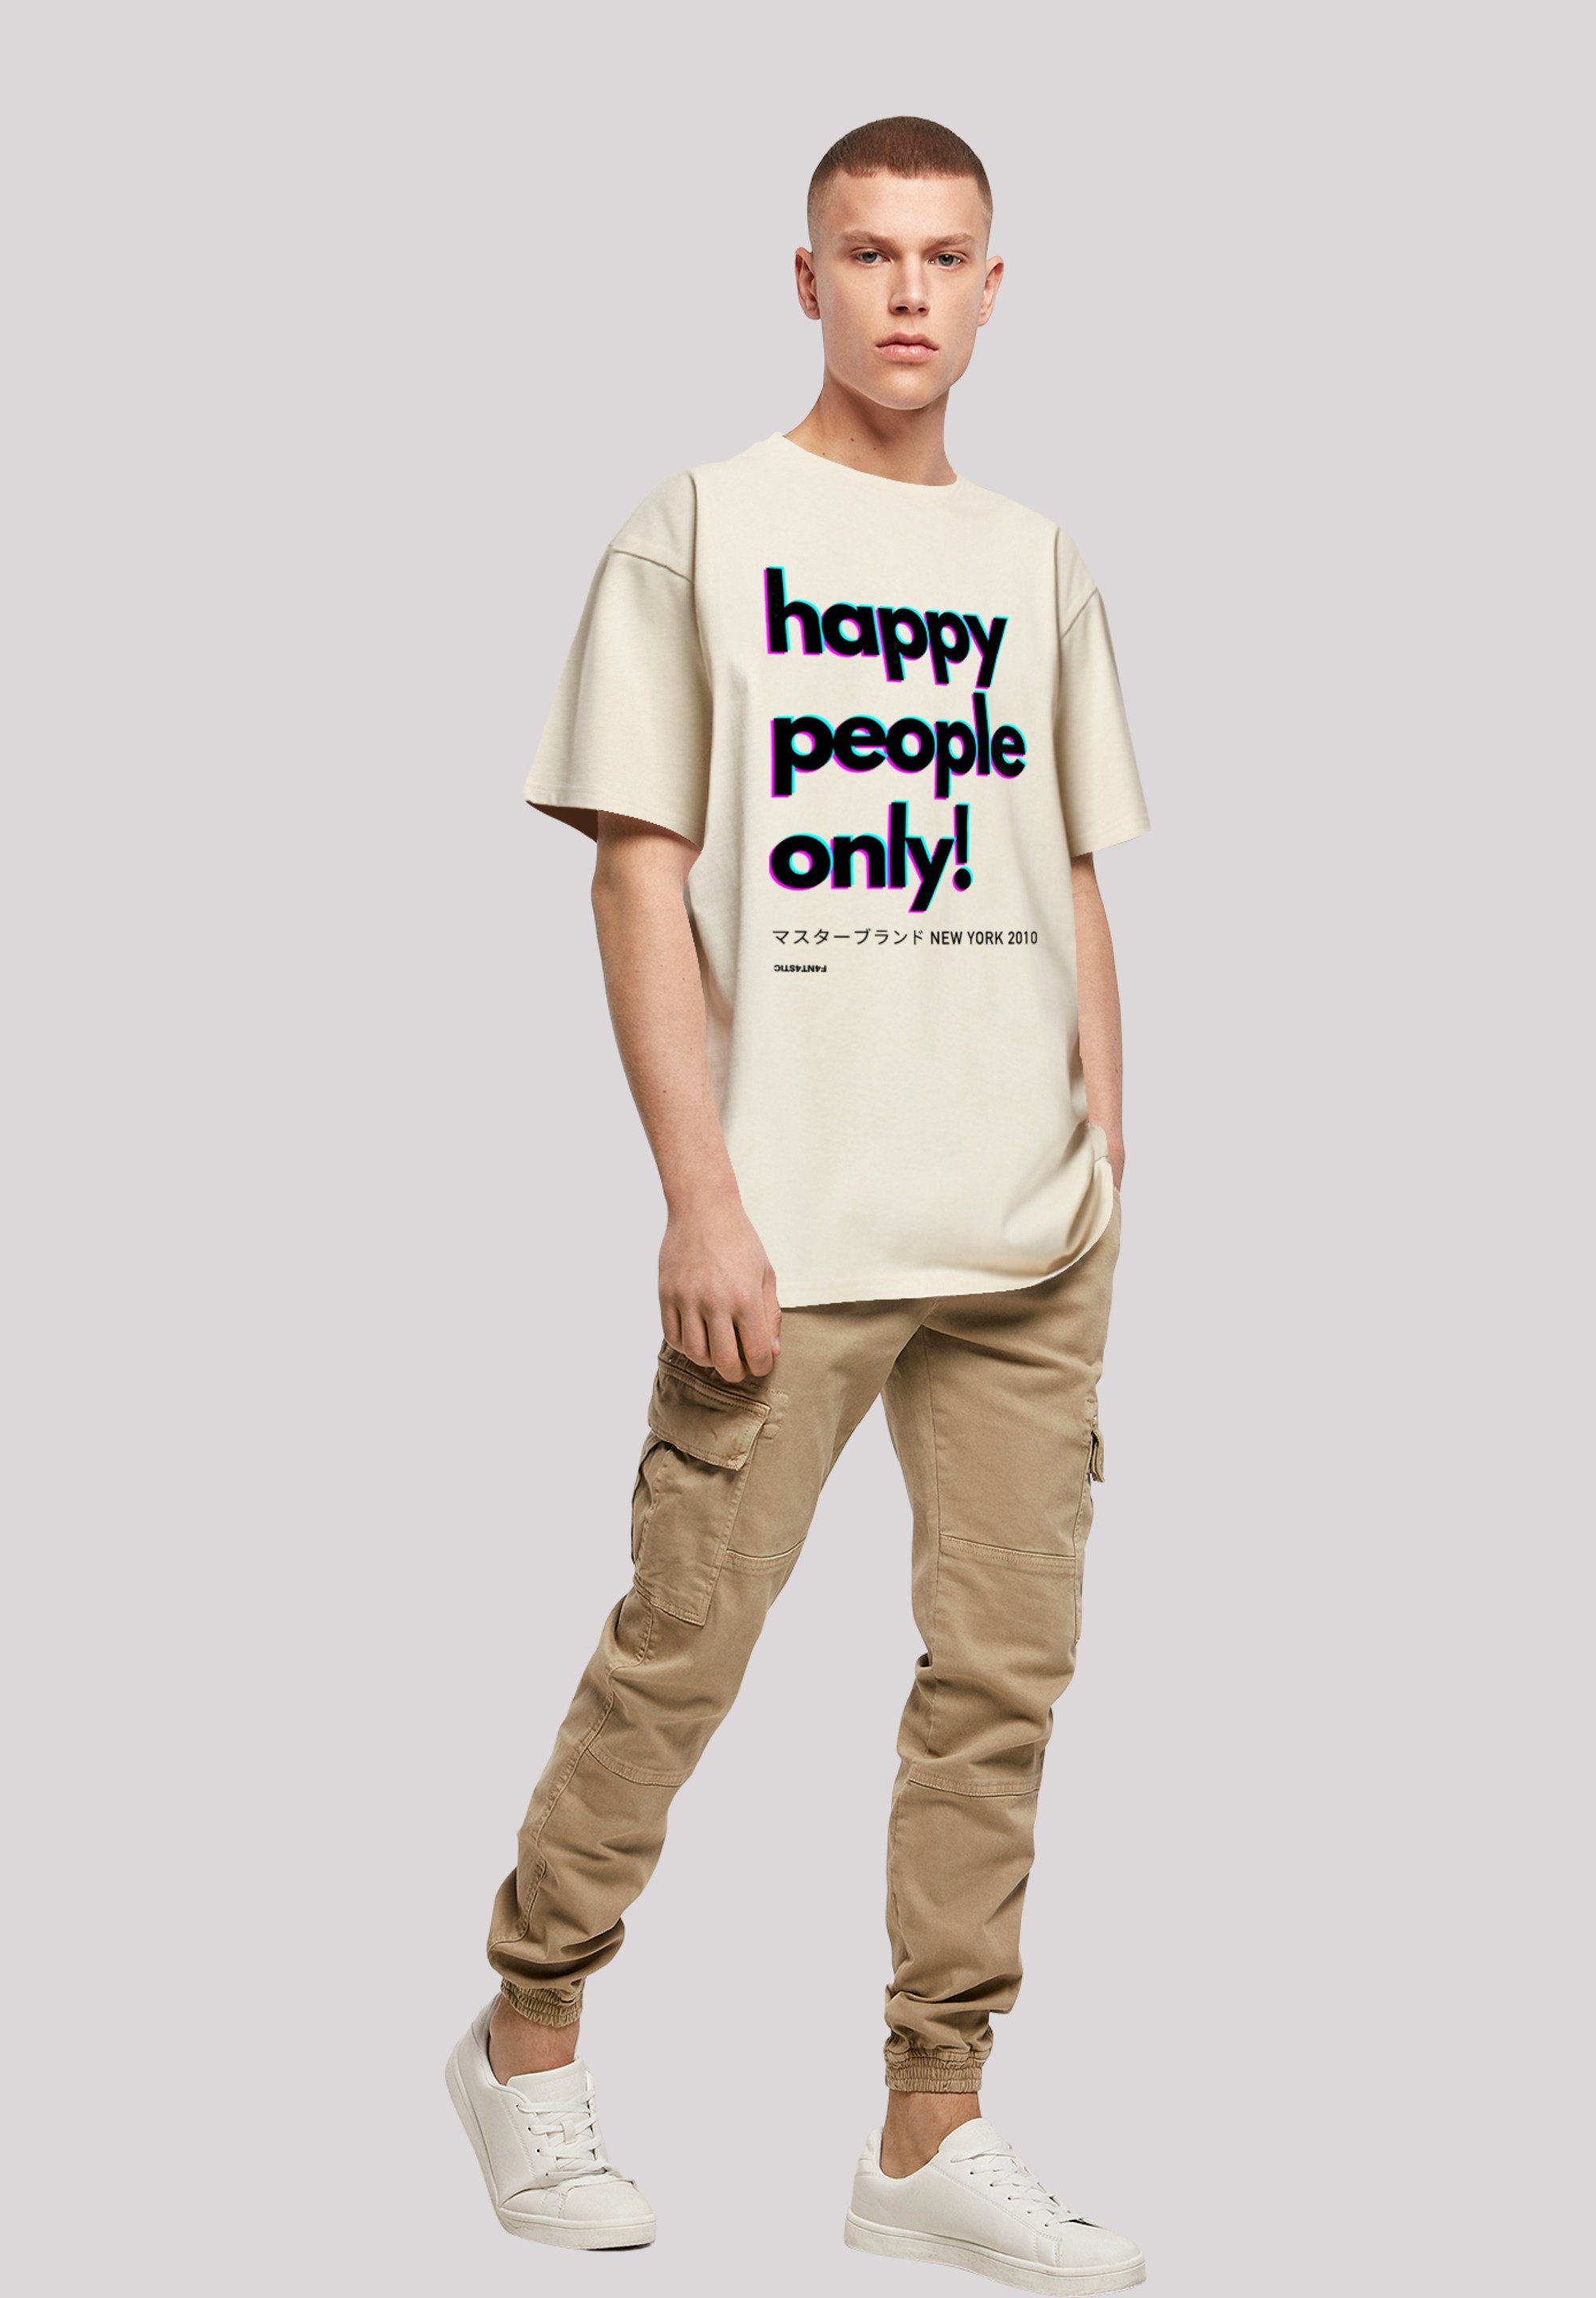 people Happy sand T-Shirt York F4NT4STIC only Print New